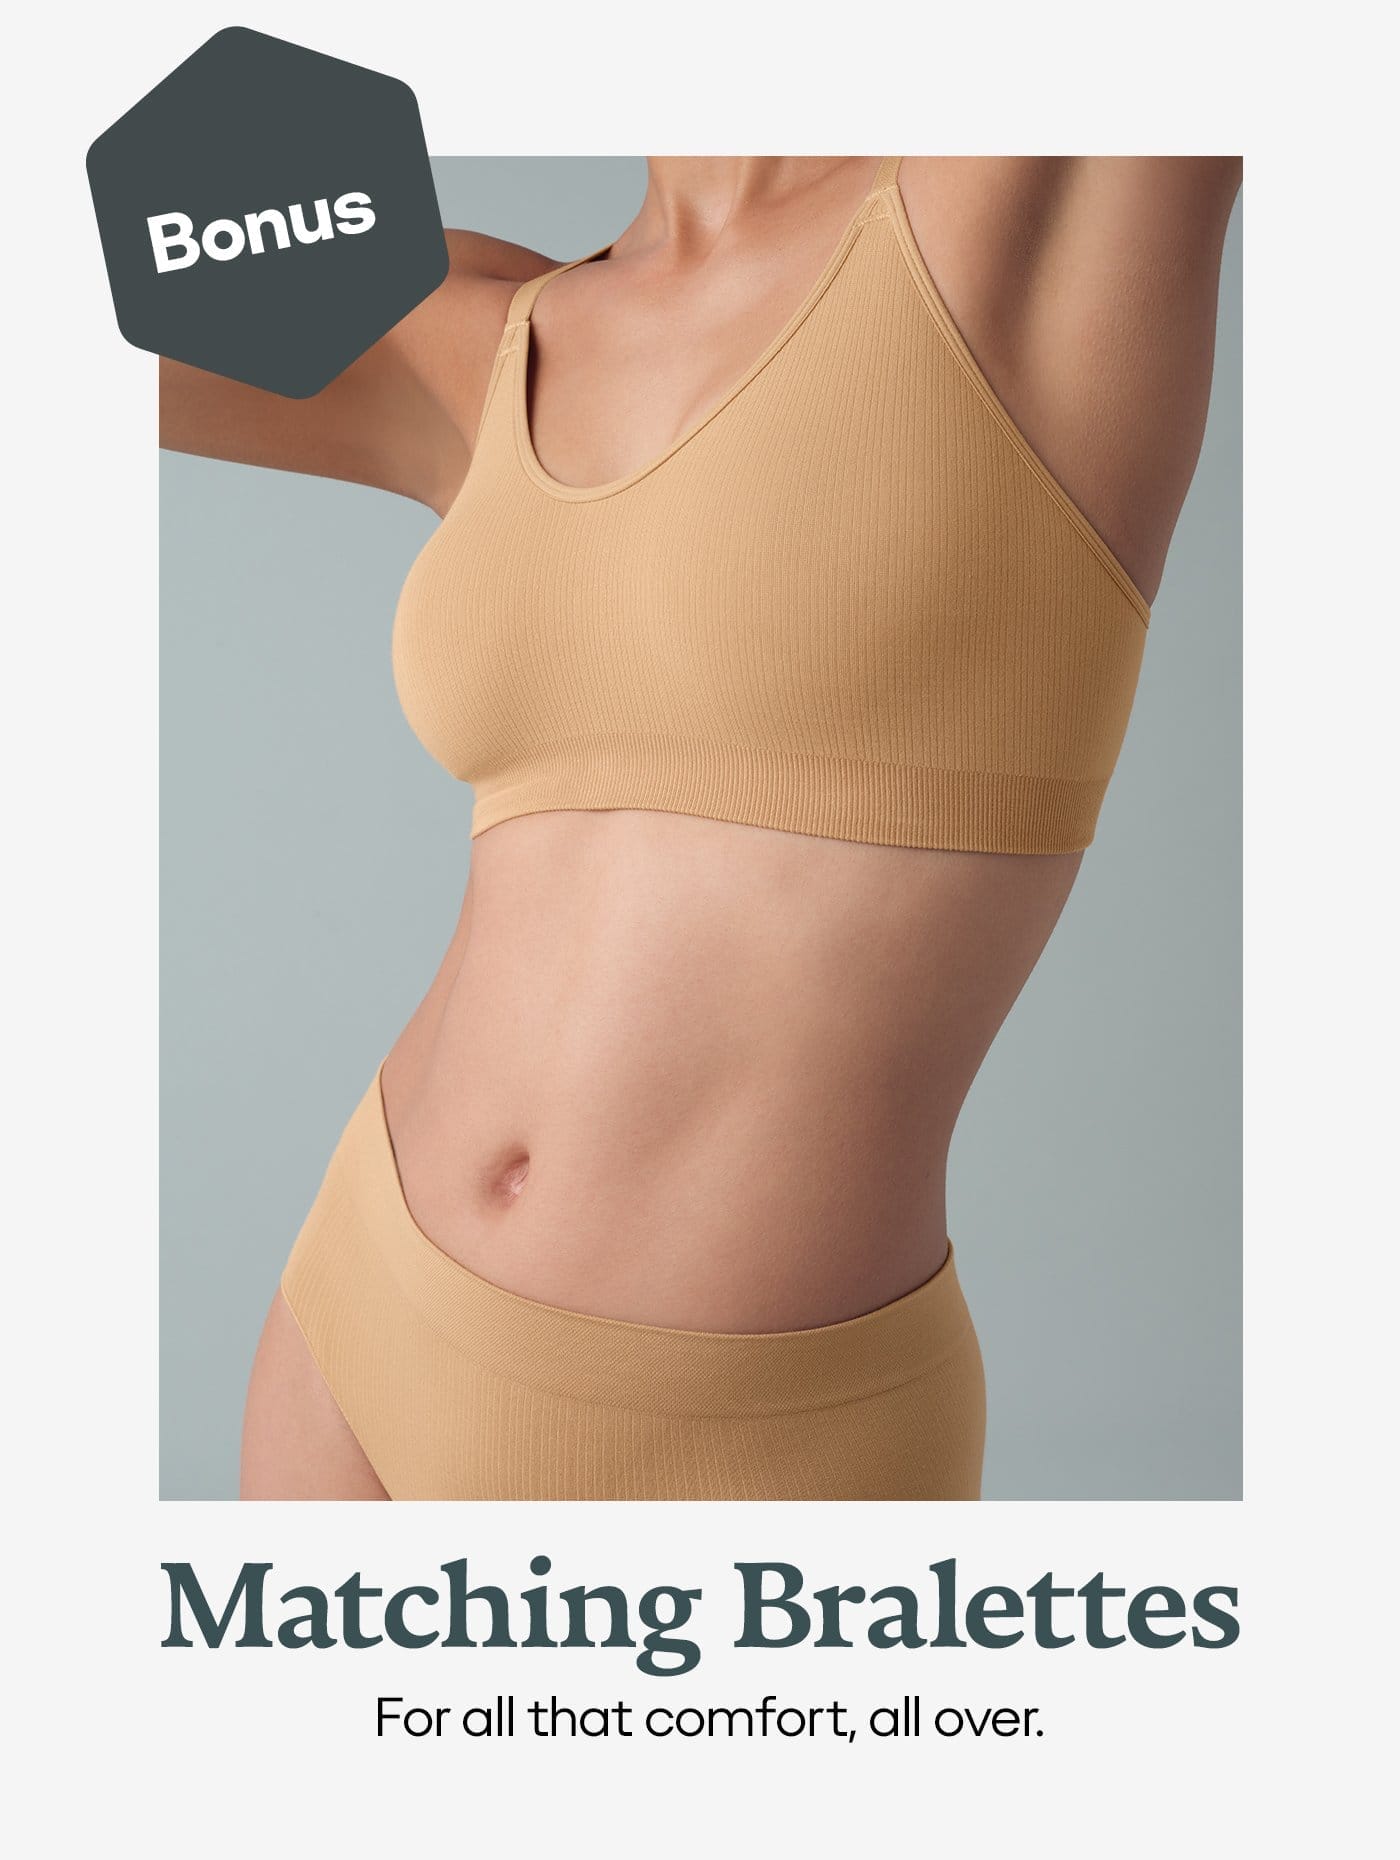 Bonus | Matching Bralettes | For all that comfort, all over.